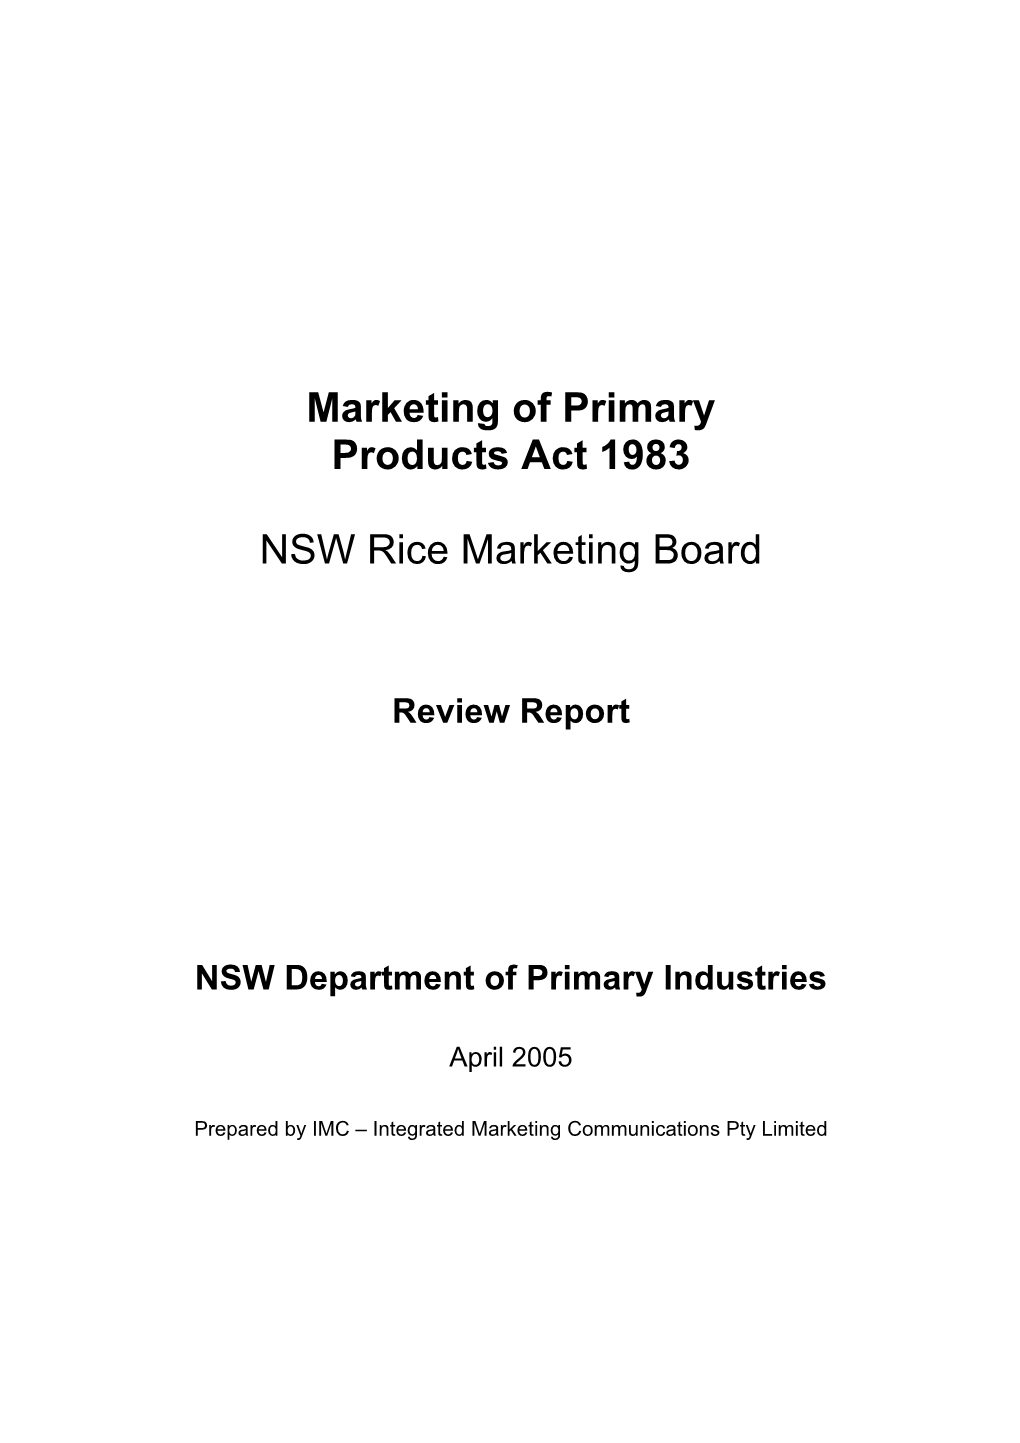 NSW Marketing of Primary Products Act 1983, Review Report, April 2005